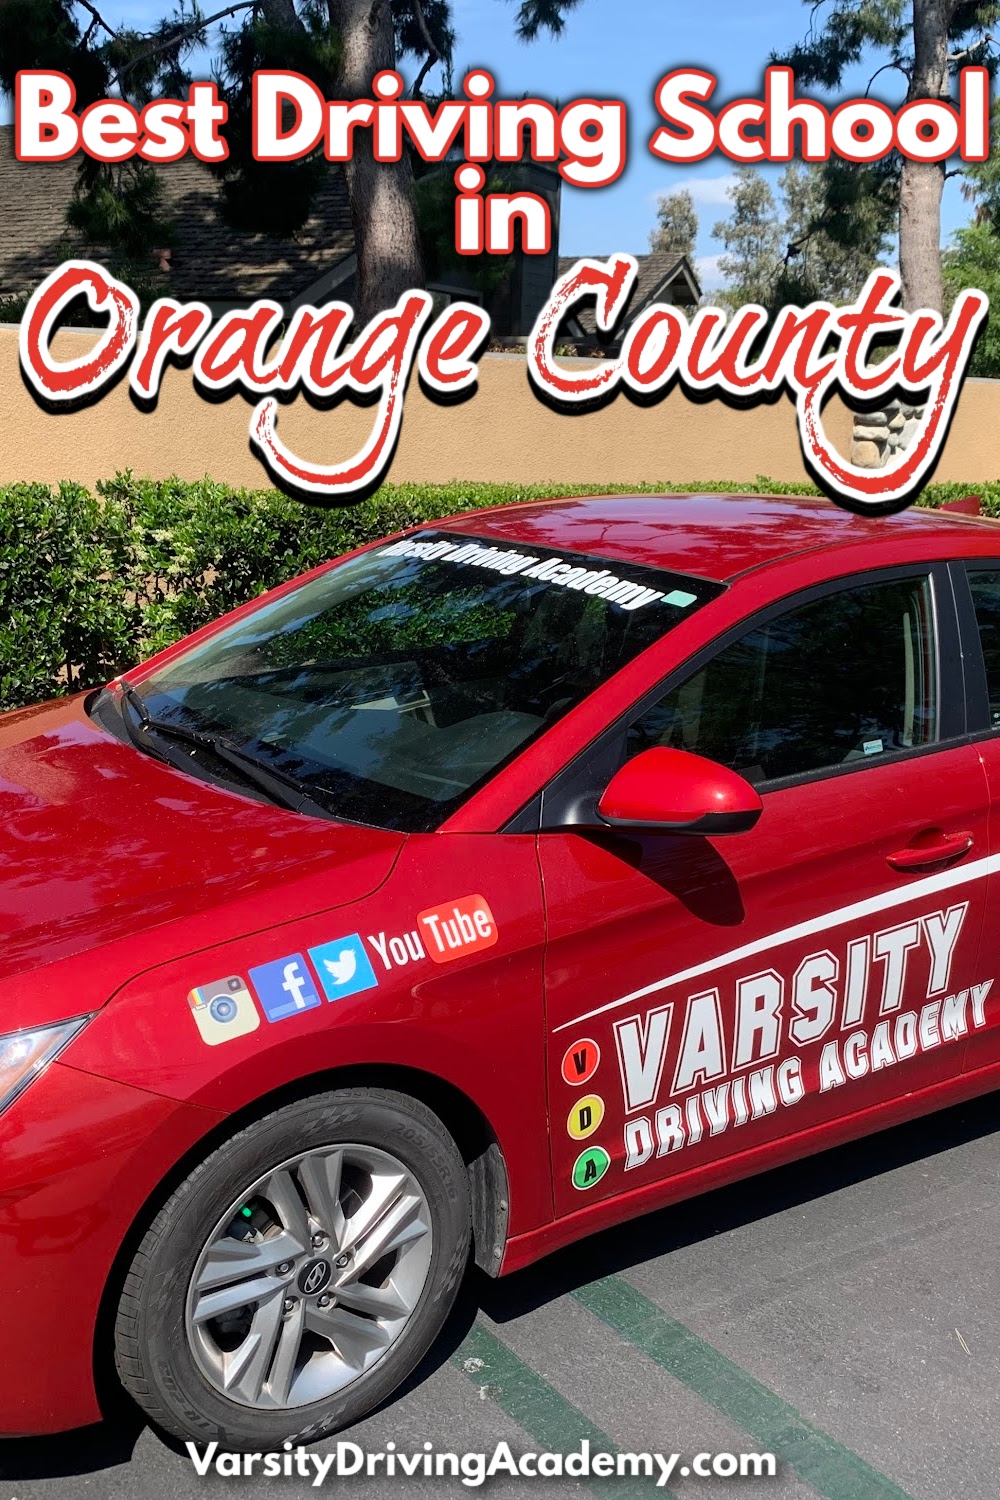 There are many factors that go into being the best driving school in Orange County and Varsity Driving Academy has them all.